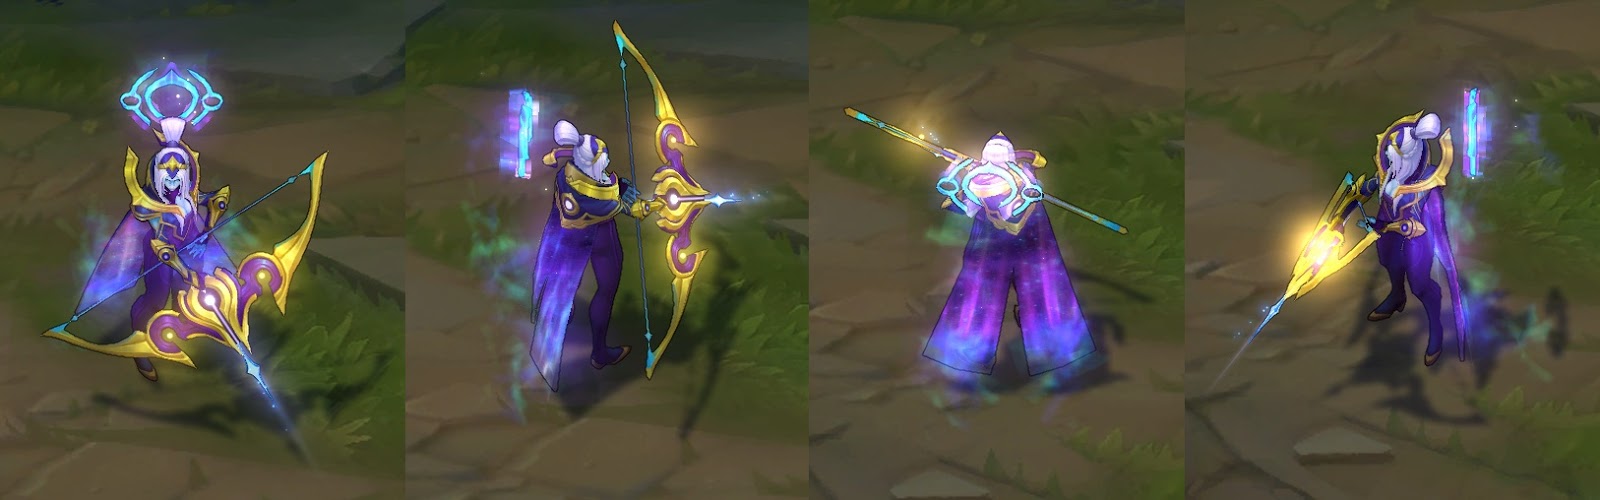 cosmic queen ashe skin for leauge of legends ingame picture